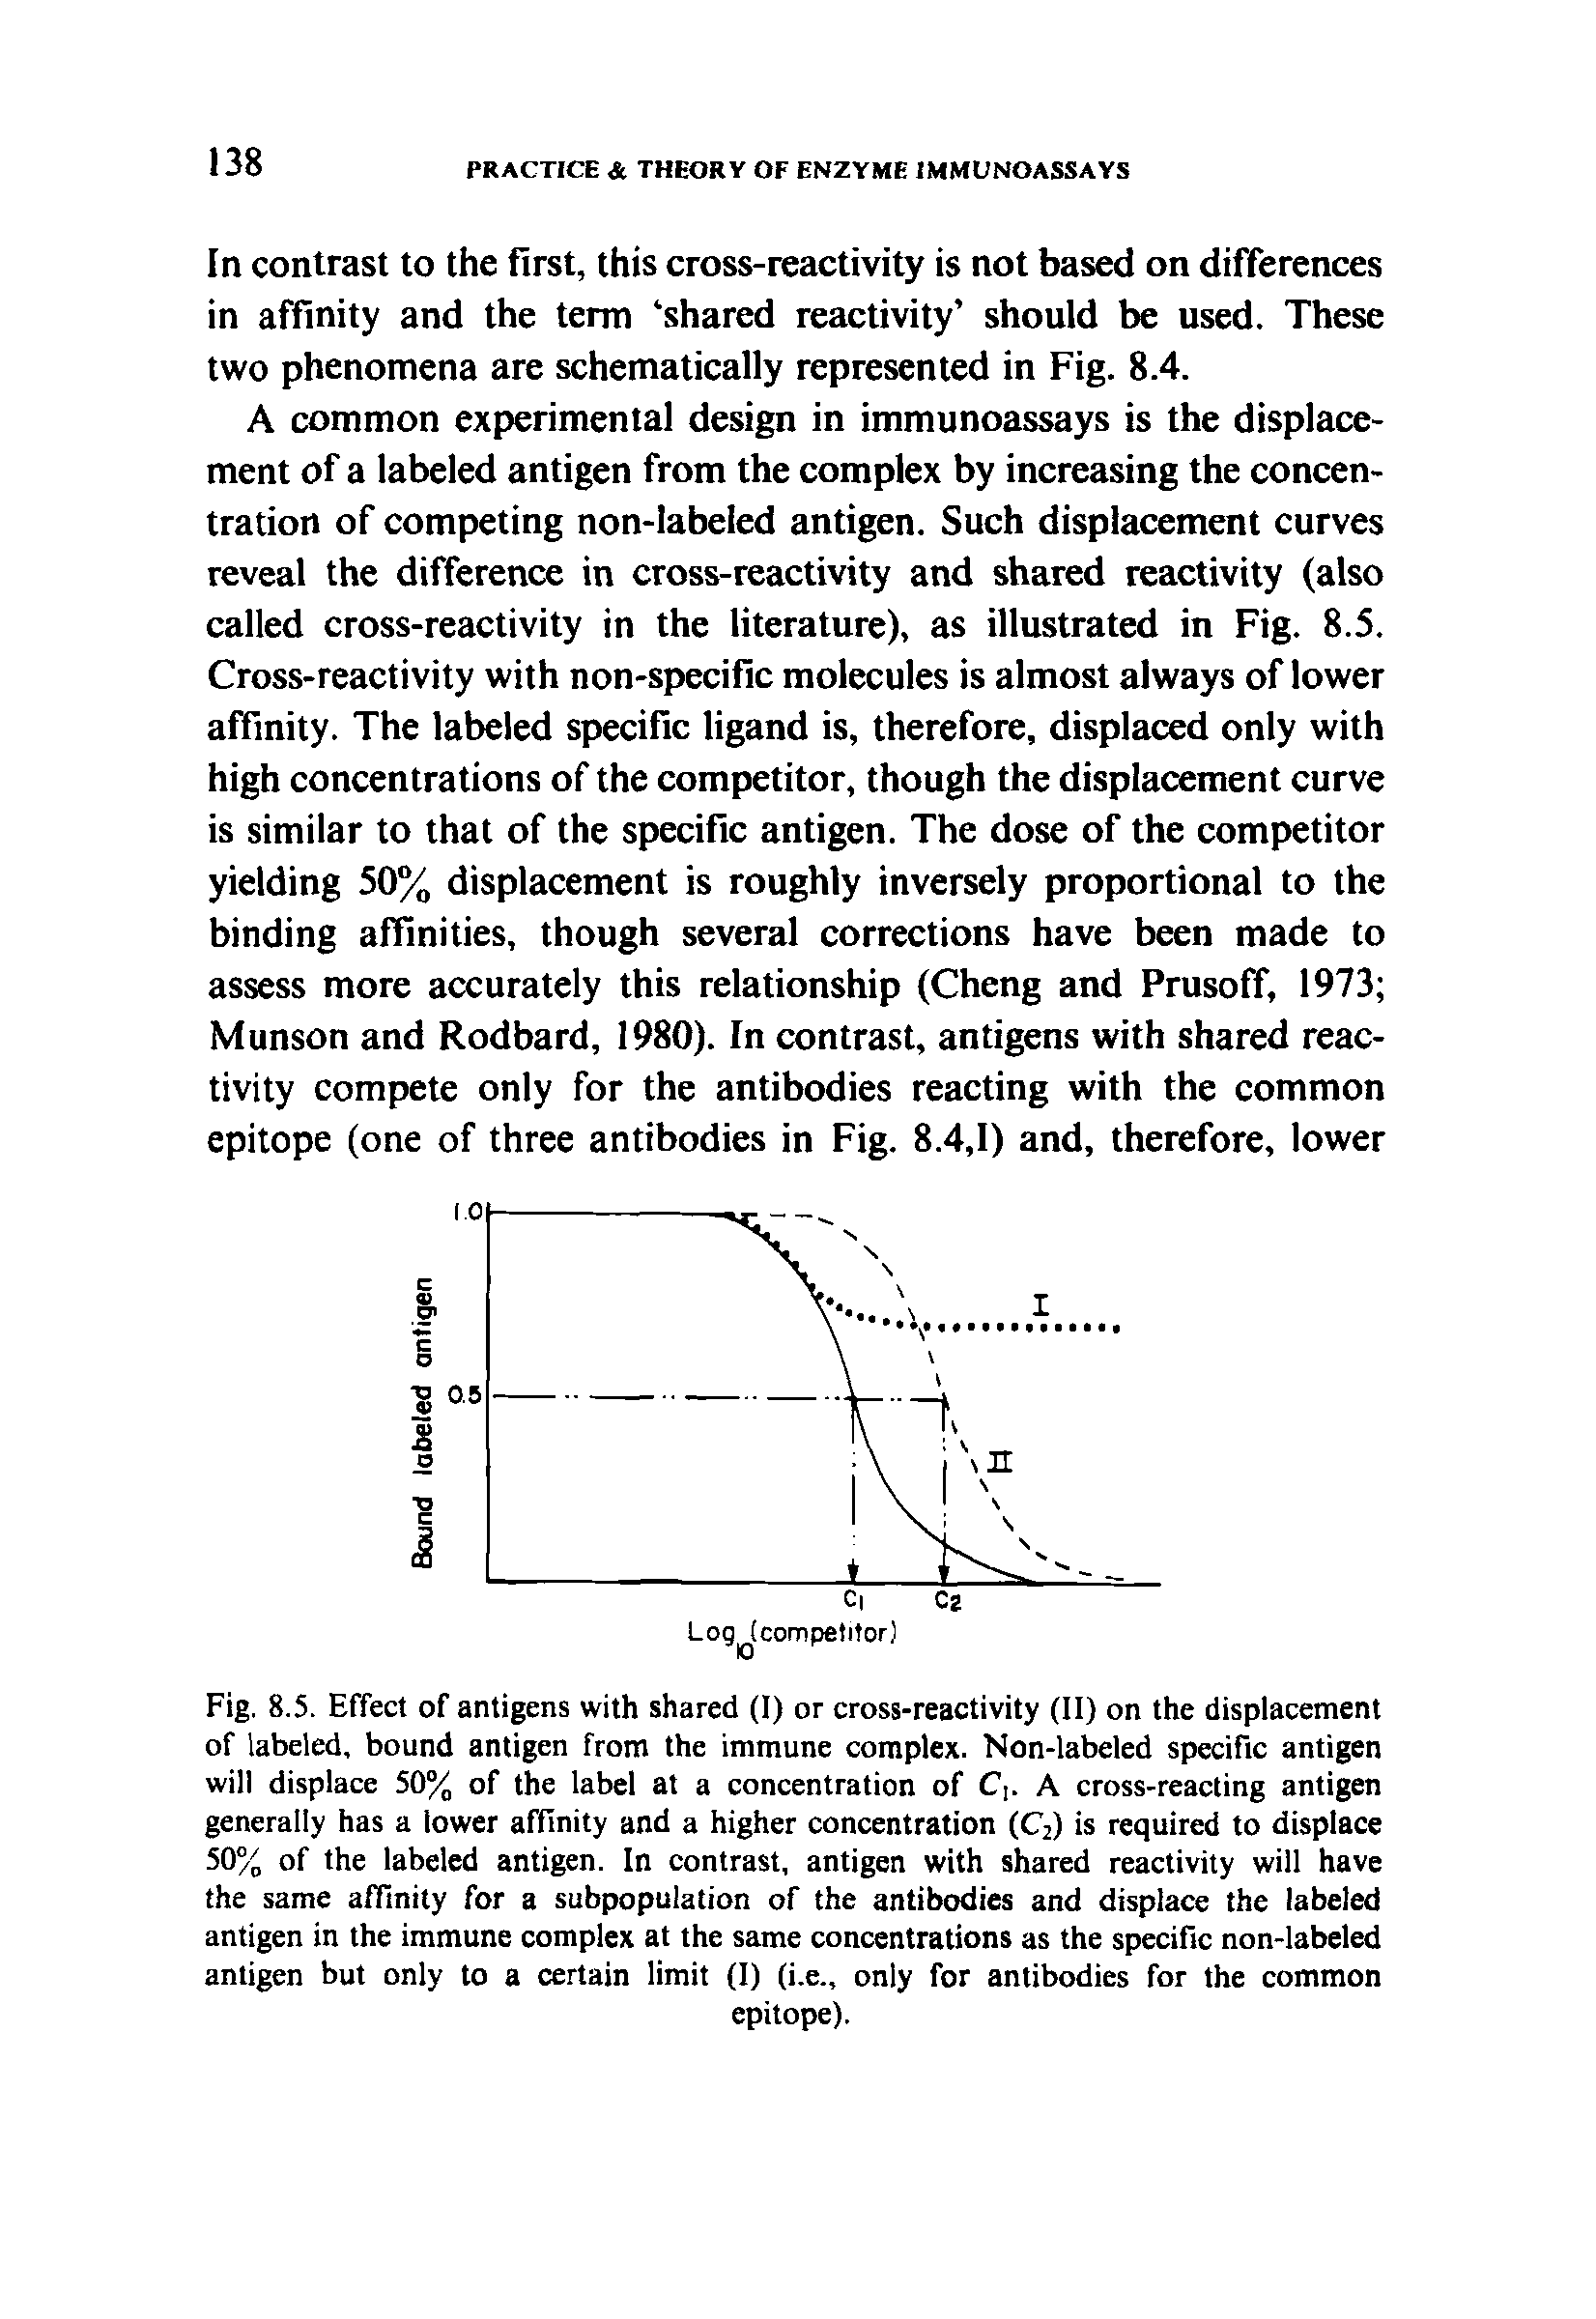 Fig. 8.5. Effect of antigens with shared (I) or cross-reactivity (II) on the displacement of labeled, bound antigen from the immune complex. Non-labeled specific antigen will displace 50% of the label at a concentration of C,. A cross-reacting antigen generally has a lower affinity and a higher concentration (C2) is required to displace 50% of the labeled antigen. In contrast, antigen with shared reactivity will have the same affinity for a subpopulation of the antibodies and displace the labeled antigen in the immune complex at the same concentrations as the specific non-labeled antigen but only to a certain limit (I) (i.e., only for antibodies for the common...